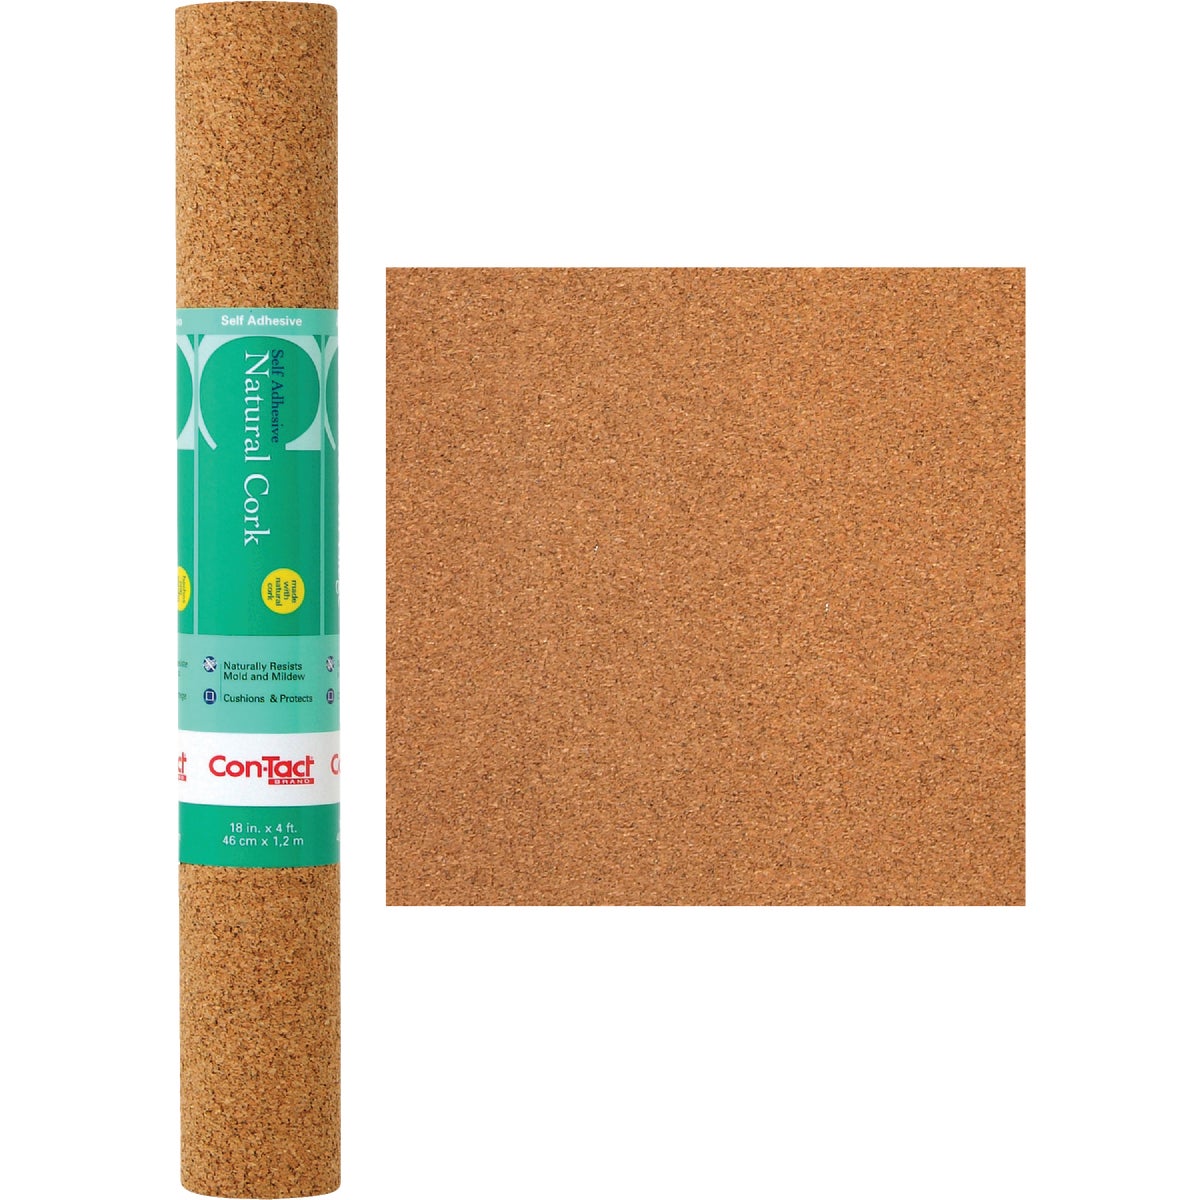 Item 601785, Self-adhesive roll can be cut into any shape and size, so it's perfect for 